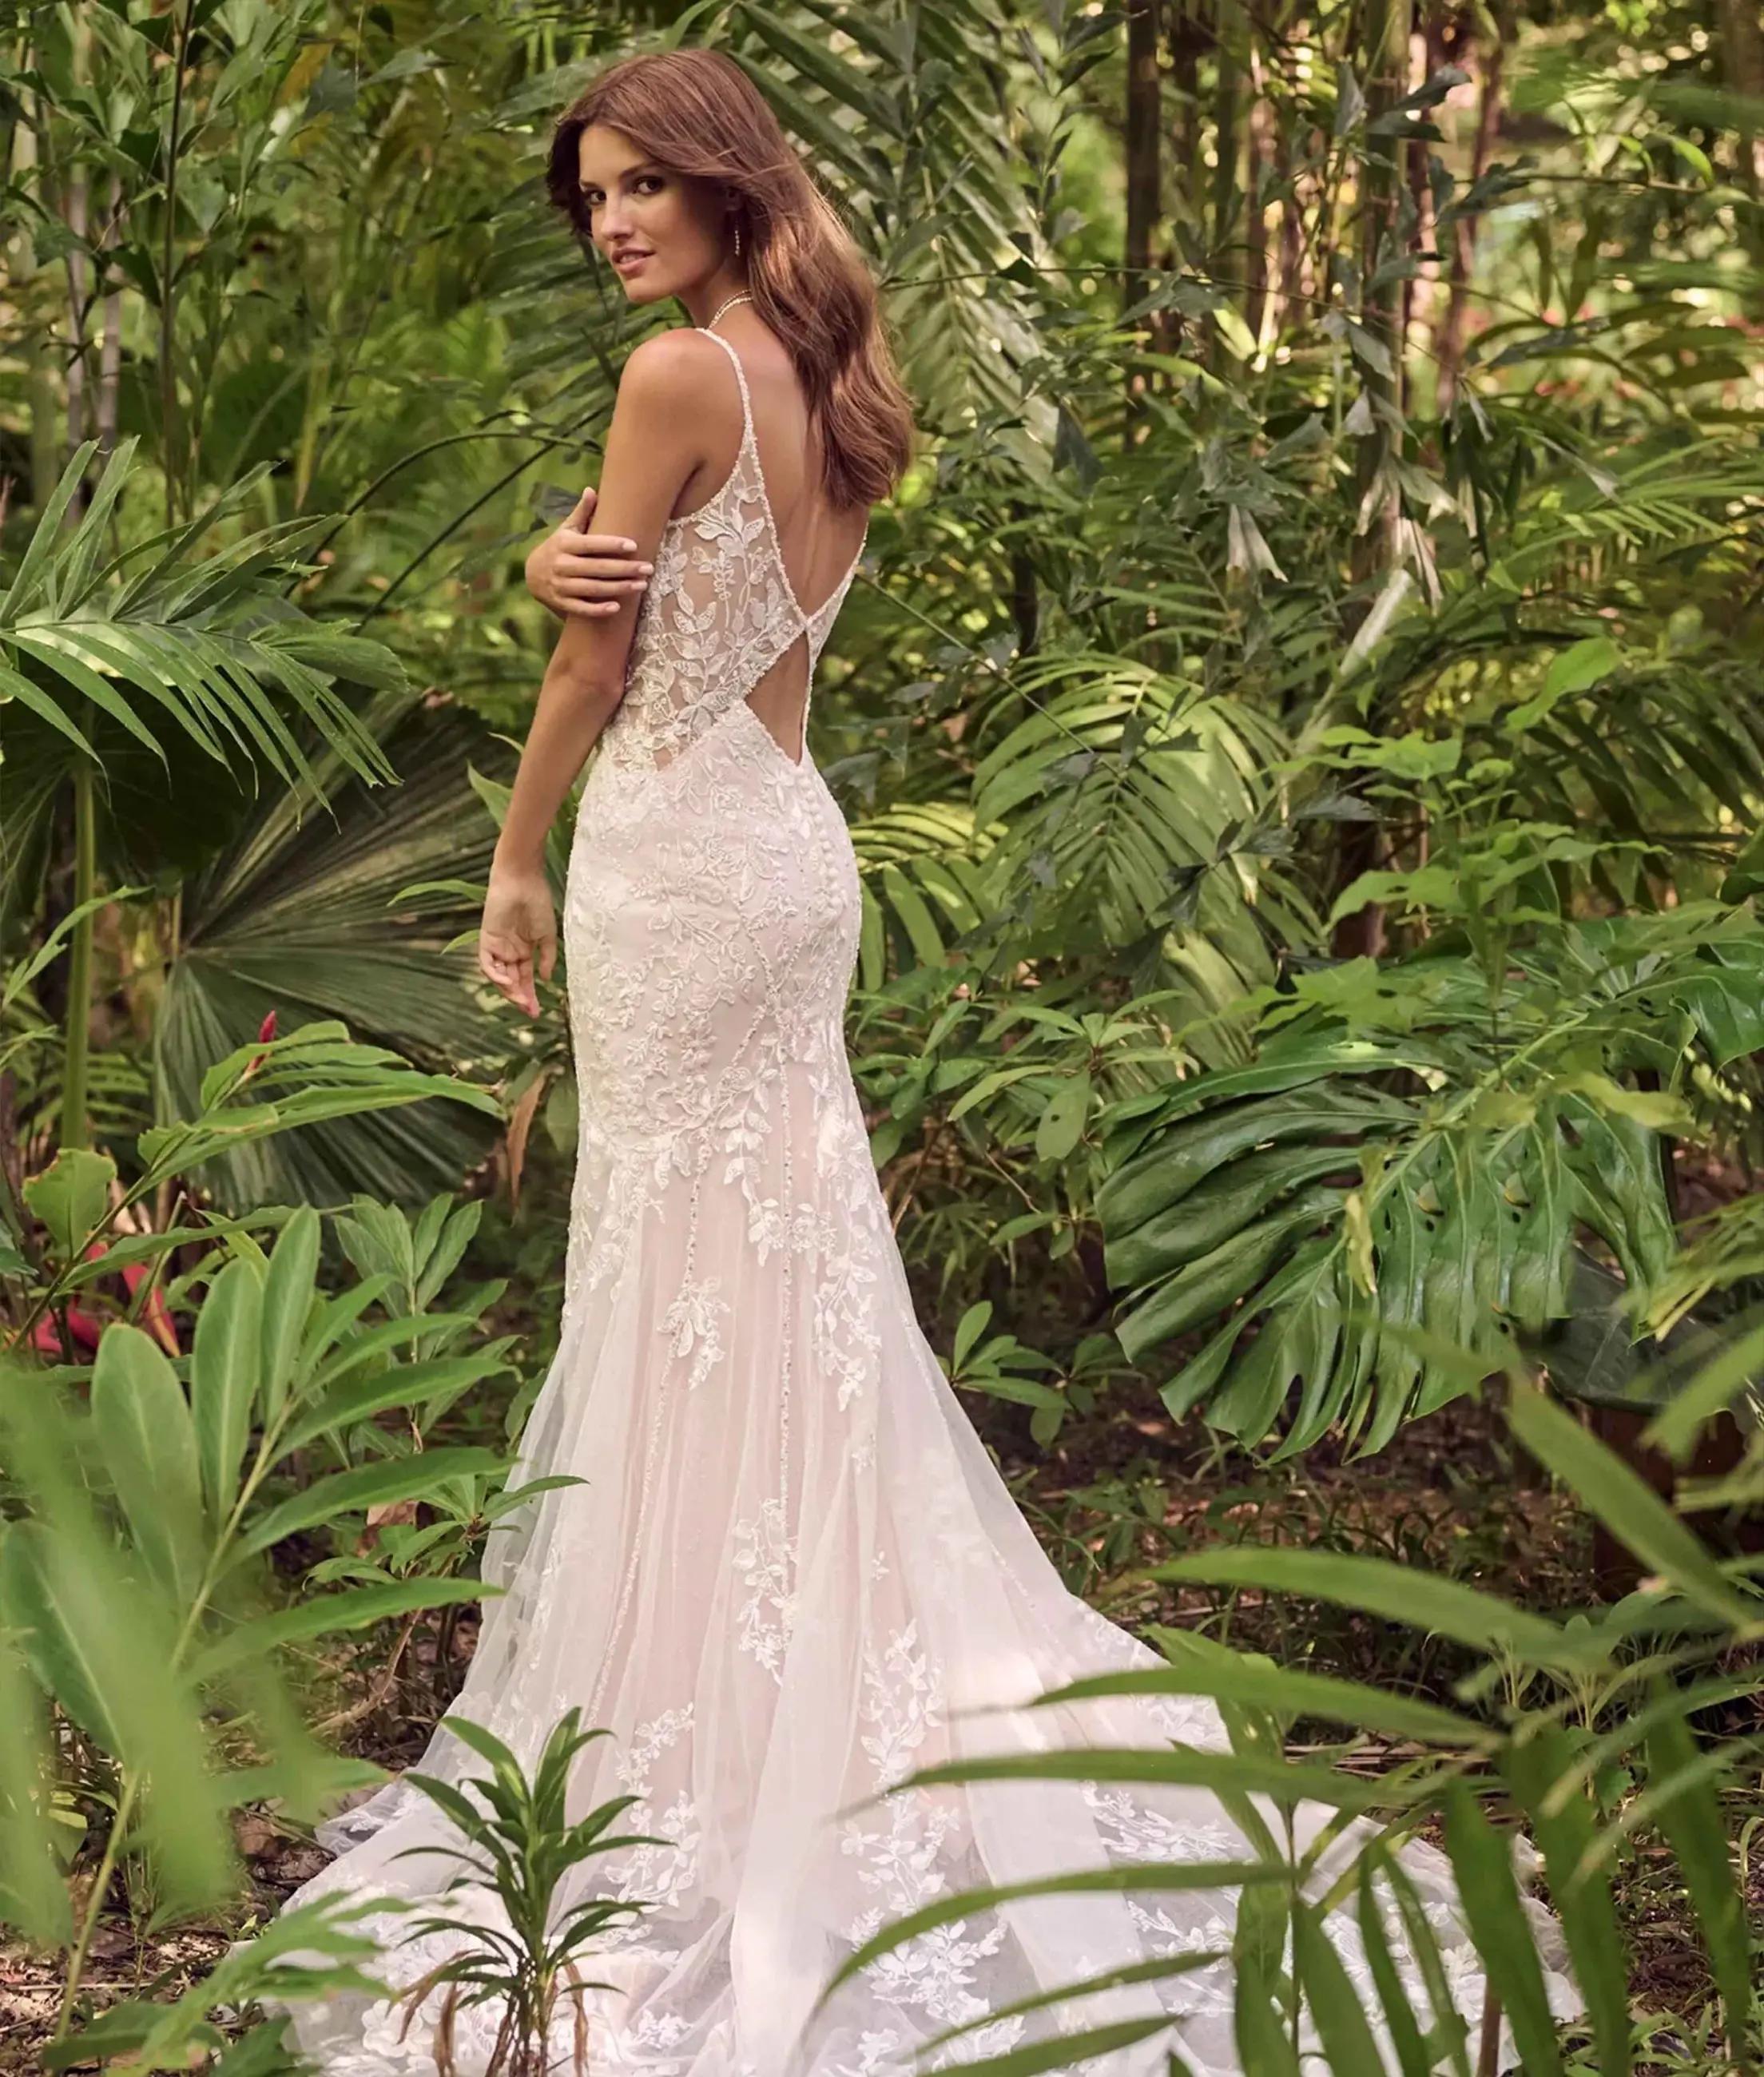 Model wearing a Maggie Sottero suit